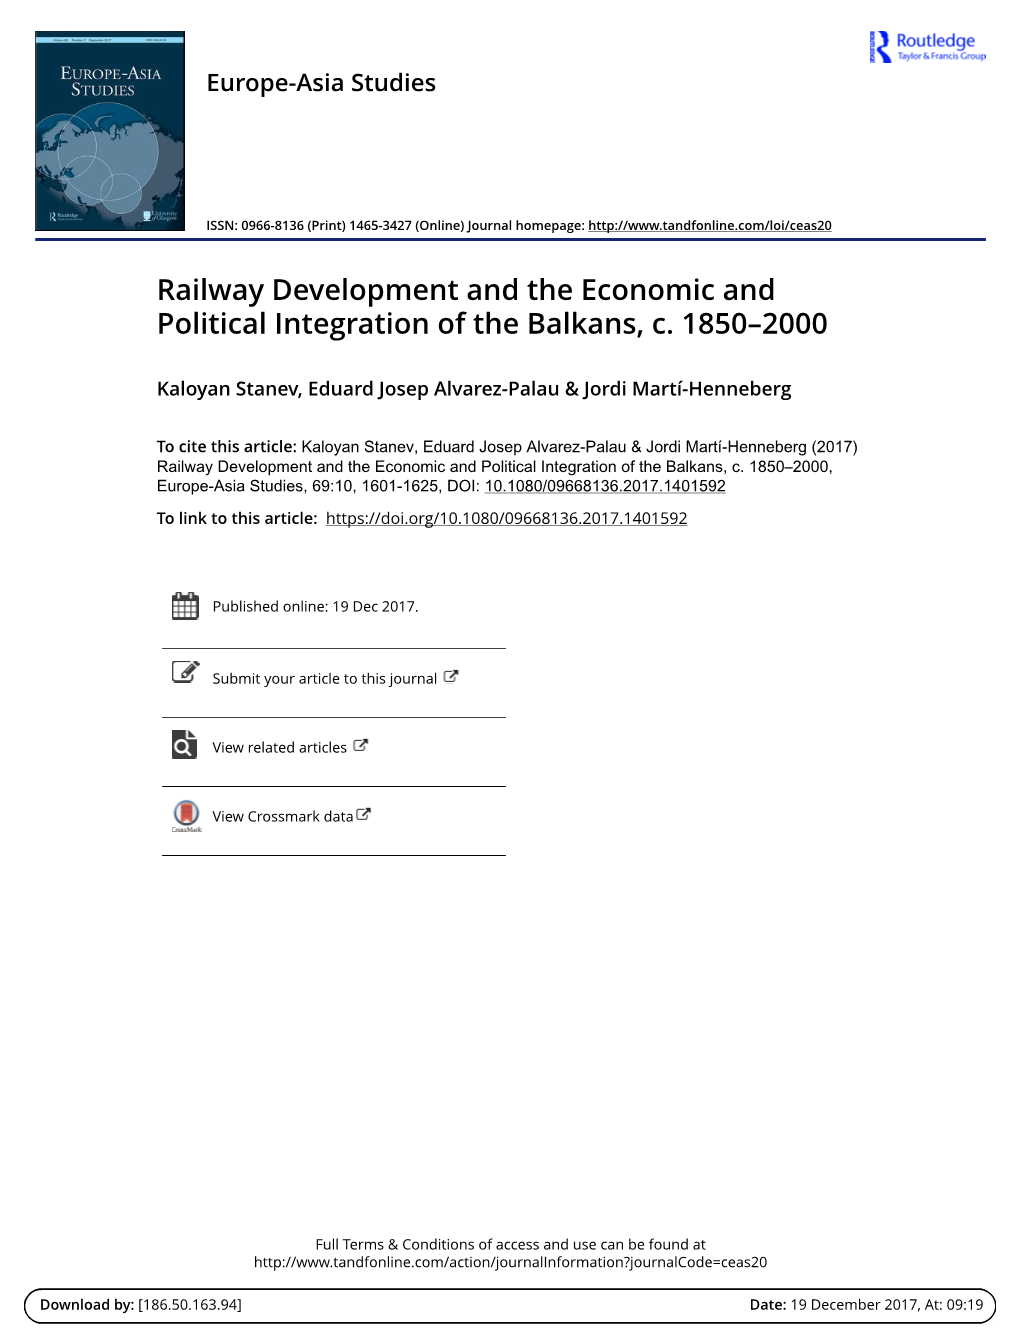 Railway Development and the Economic and Political Integration of the Balkans, C